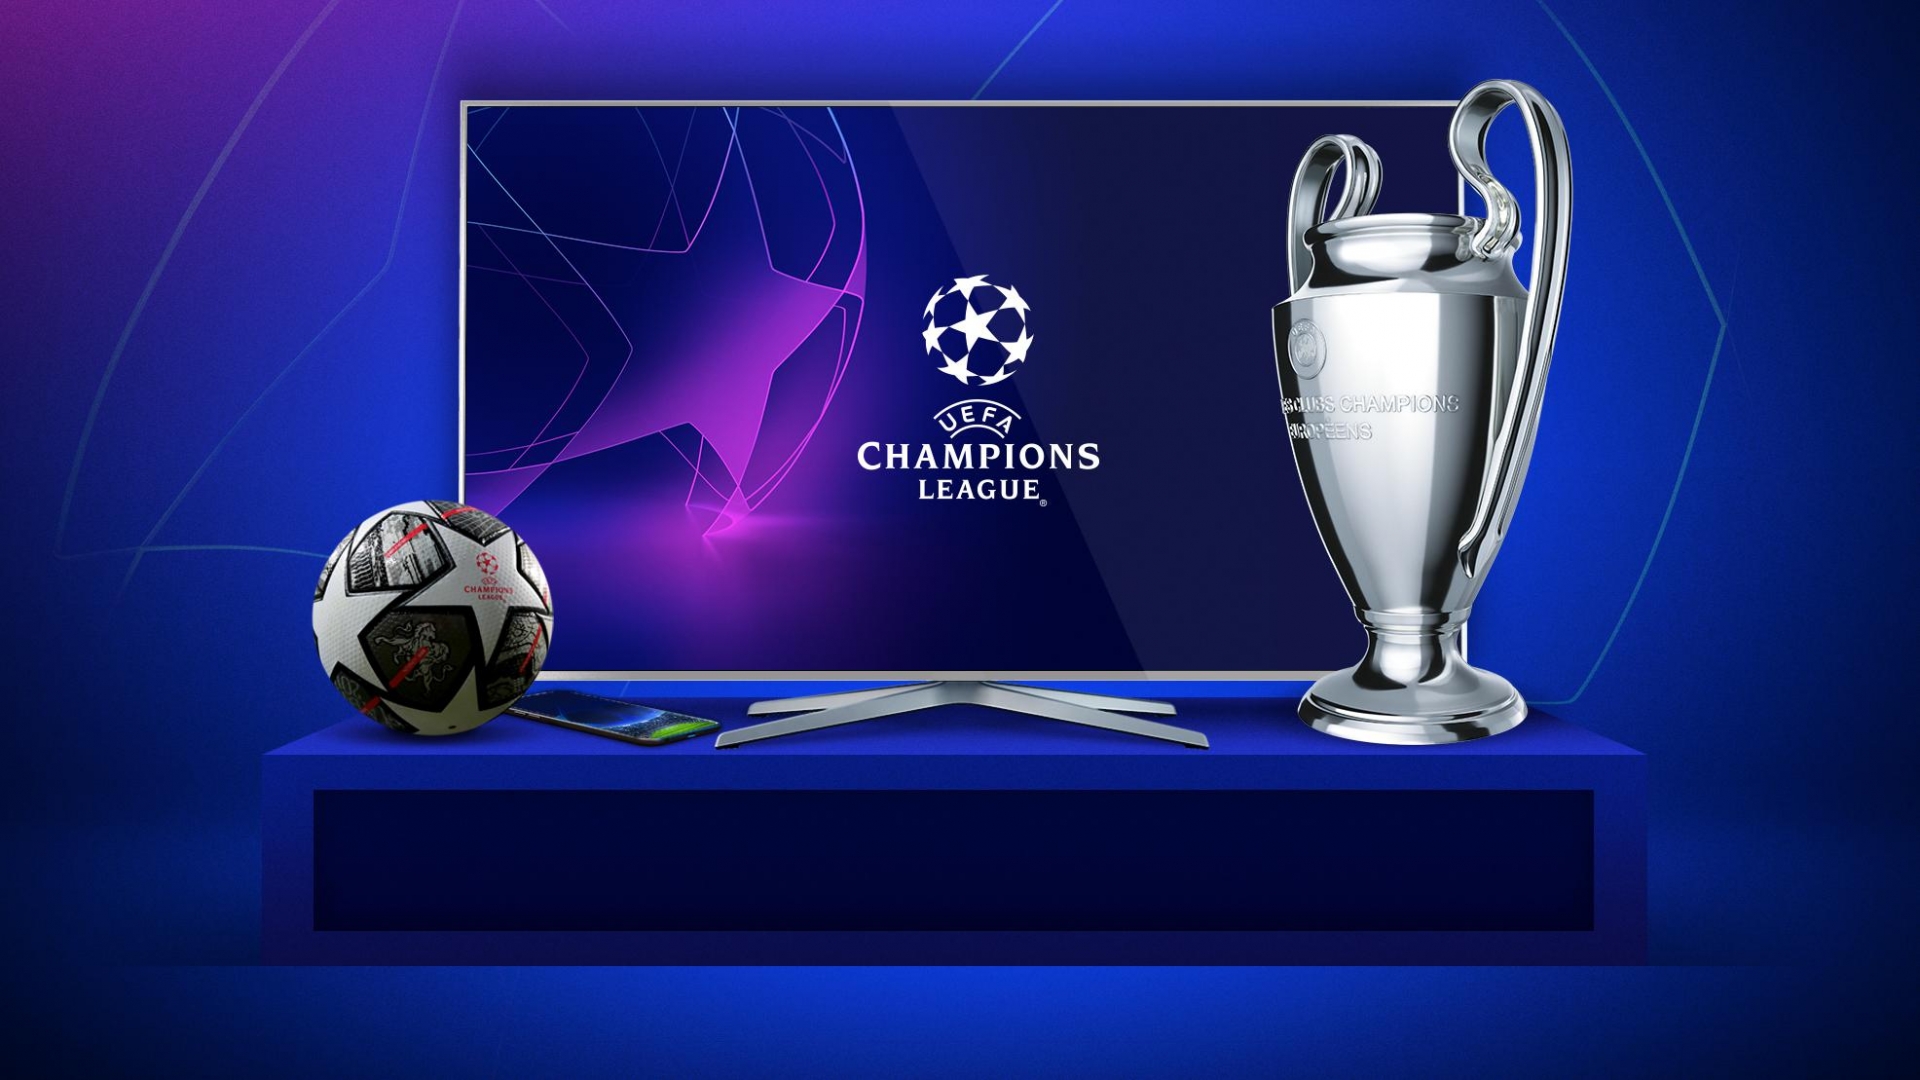 How To Watch Live Games, Semifinal Schedule of Champions League